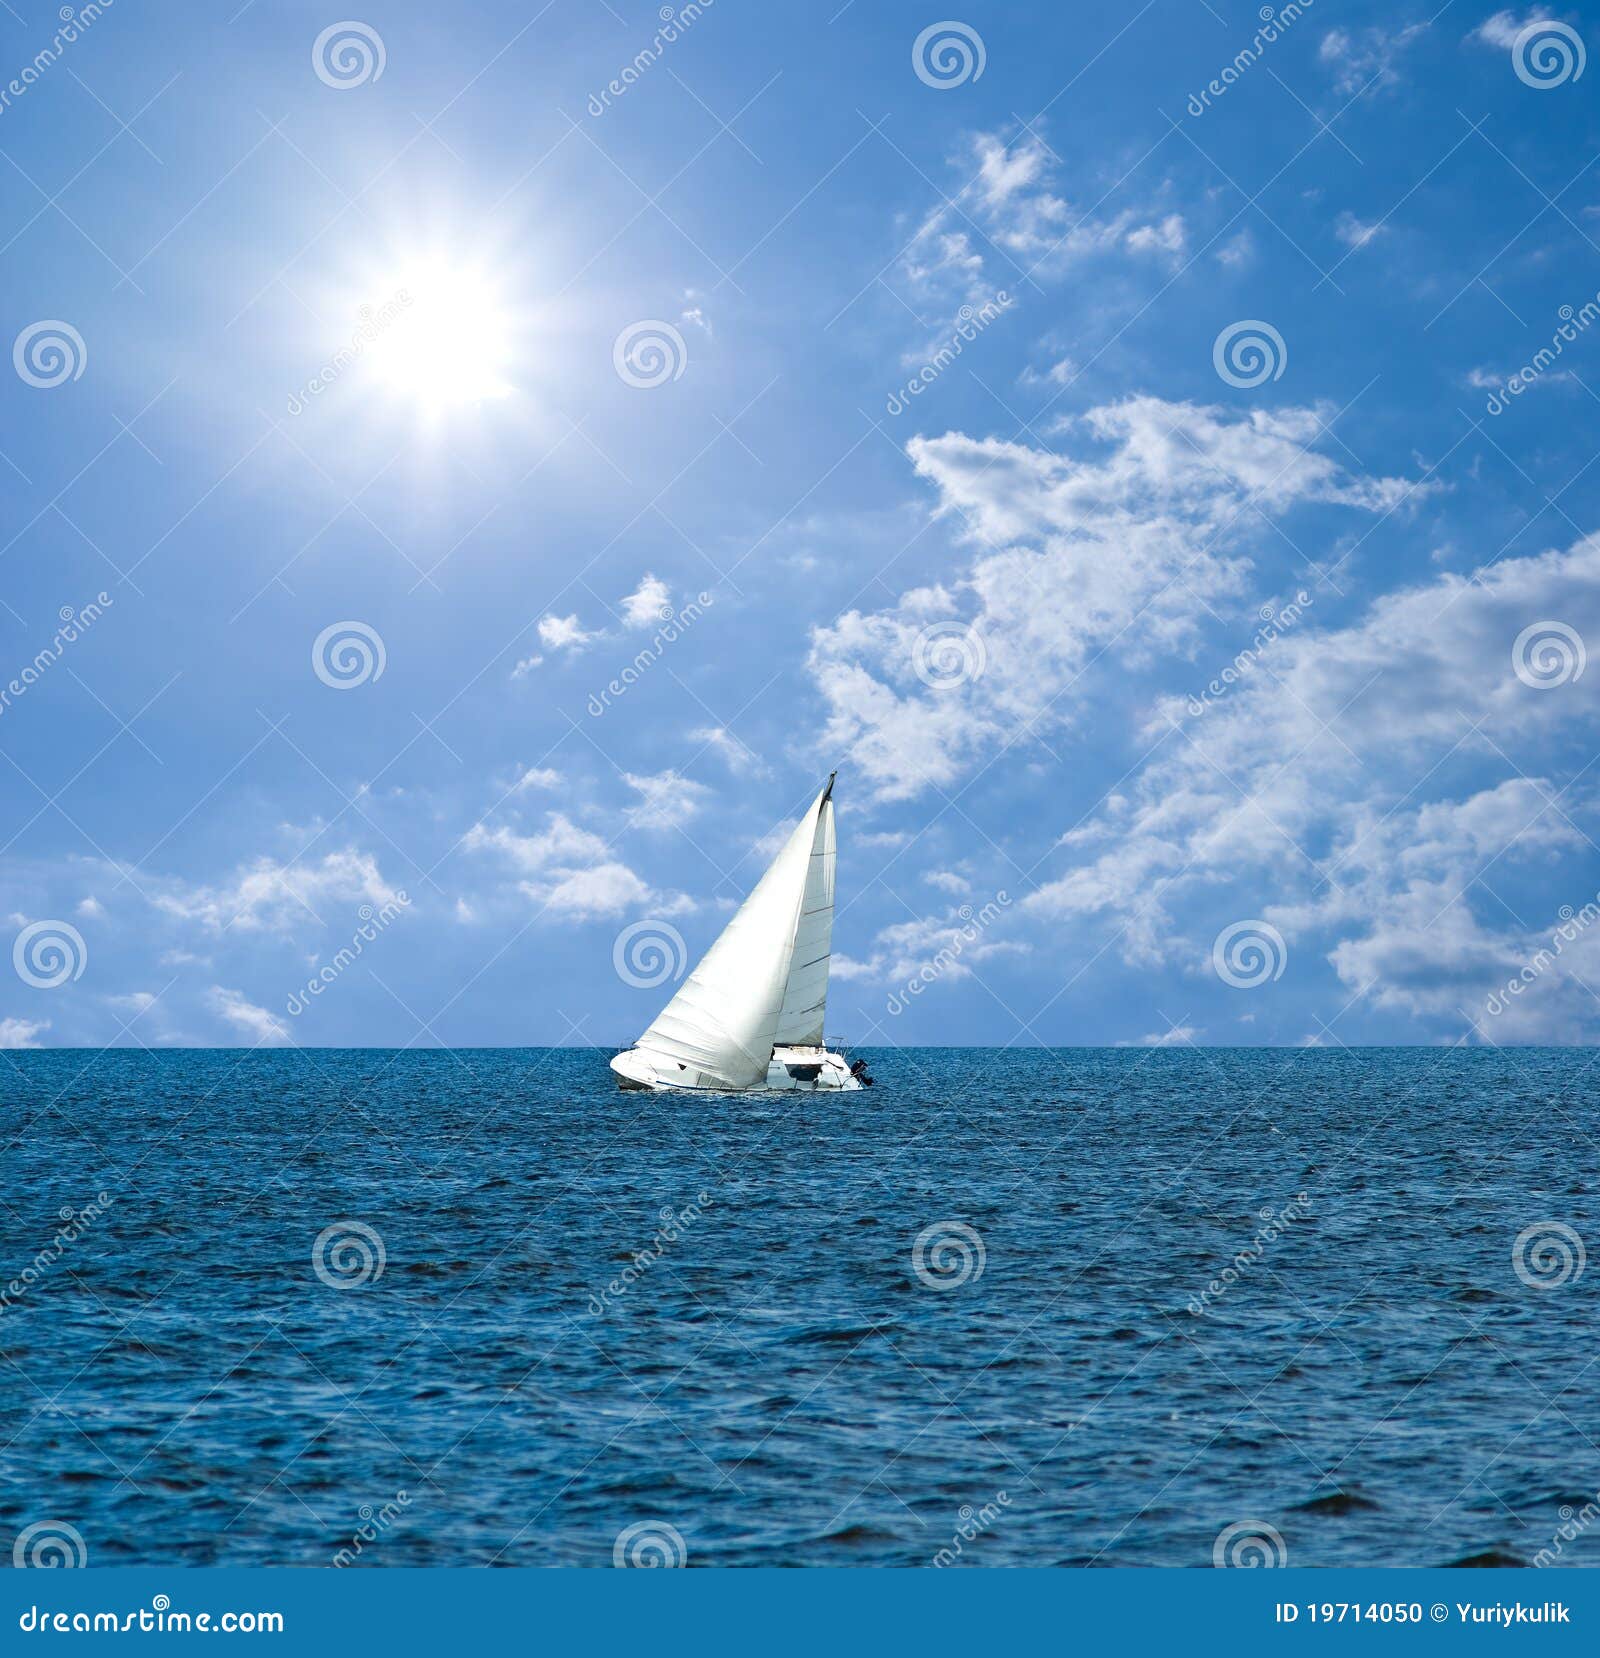 yacht in a endless sea